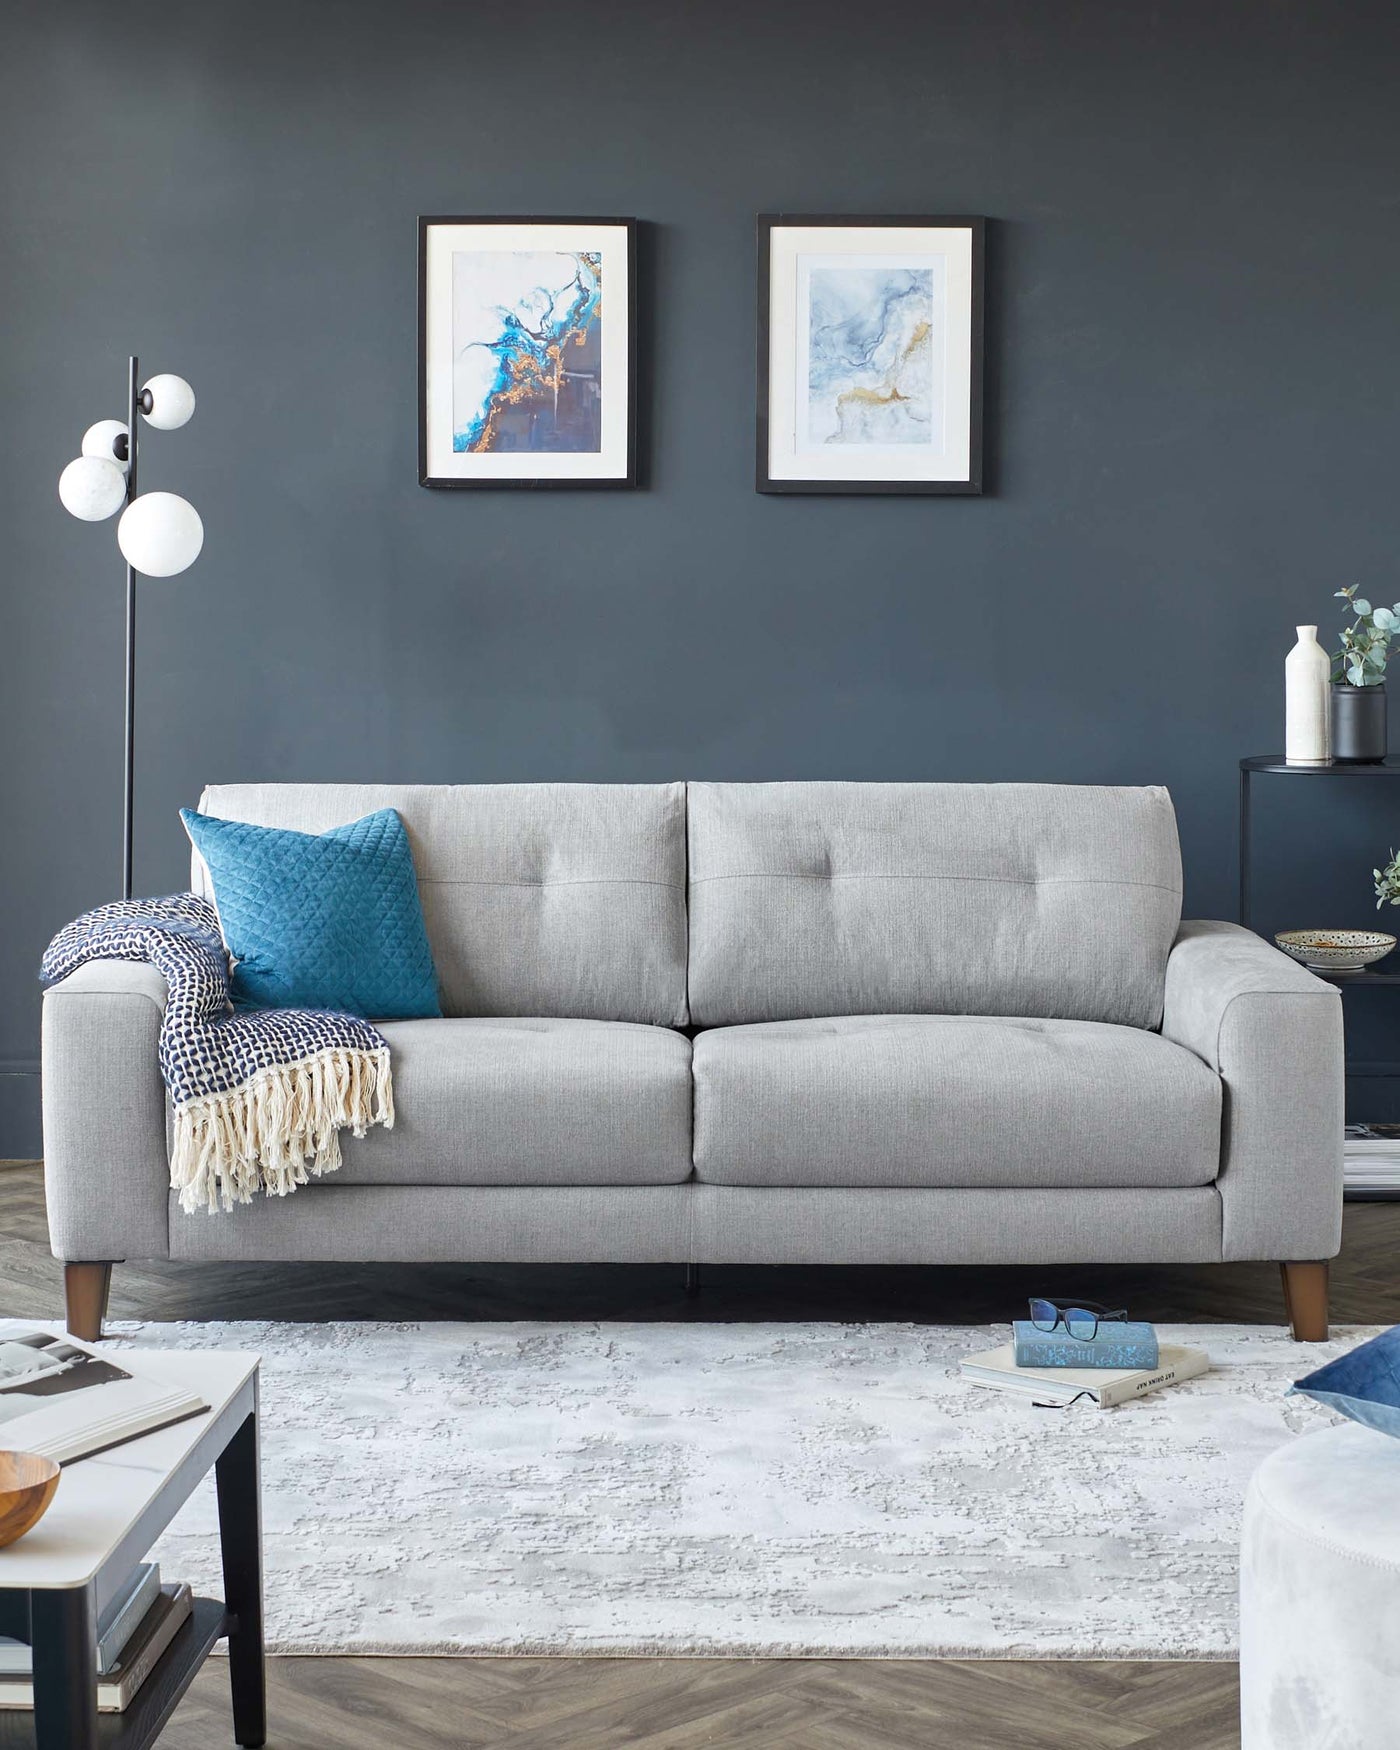 Contemporary grey fabric three-seater sofa with cushioned back and arms, accented with a blue decorative pillow and a patterned white and blue throw blanket. A sleek black floor lamp with a minimalist design featuring globe lights stands to the left, and a dark-toned side table with a vase holds a sprig to the right. The sofa sits on a distressed white area rug over a dark hardwood floor, complemented by a black coffee table with a stack of books and glasses in the foreground.